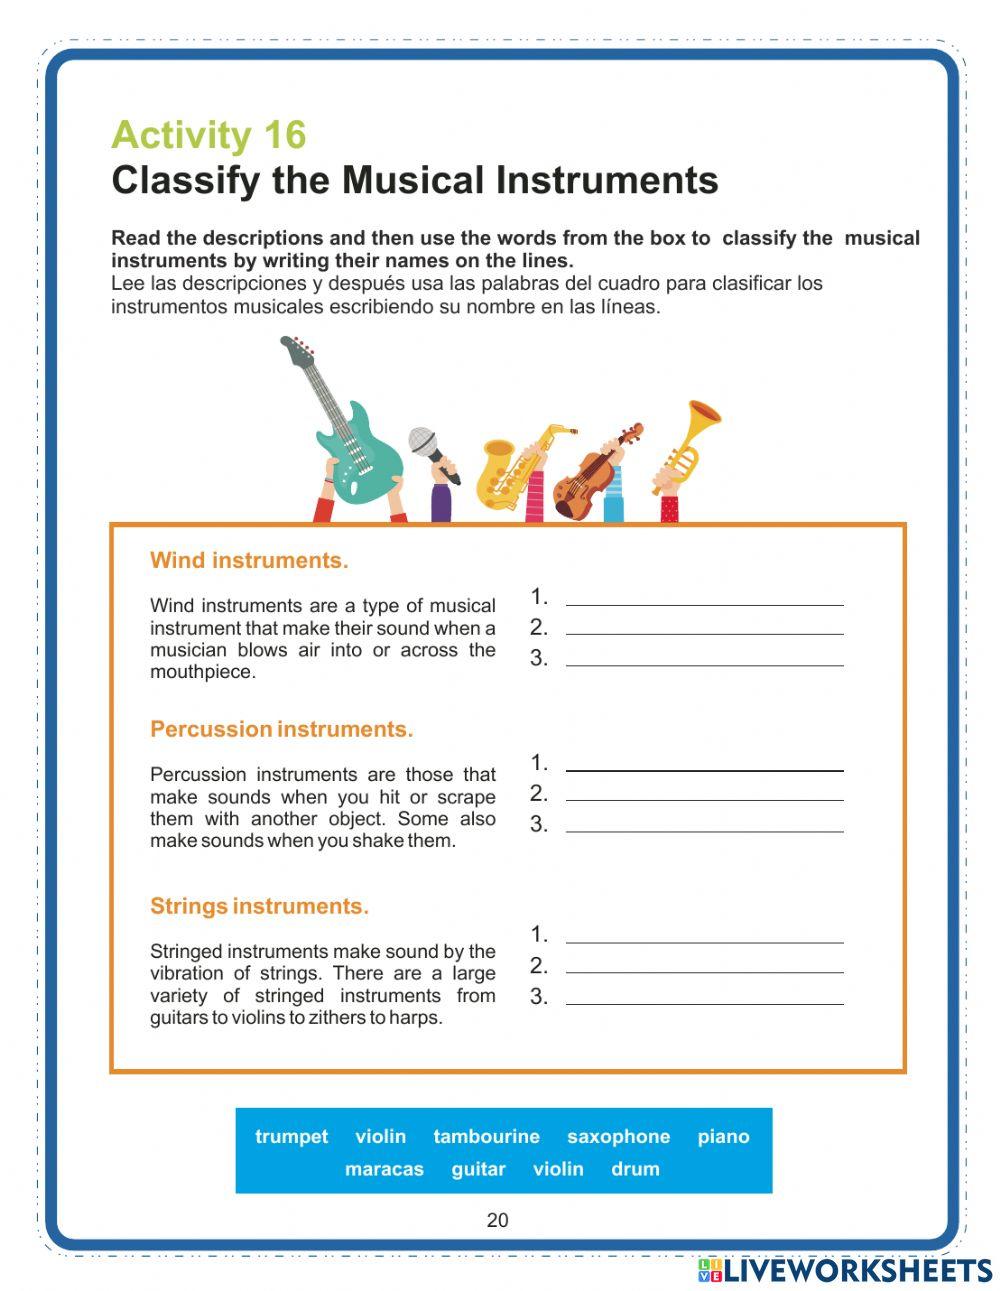 Classify the Musical Instruments